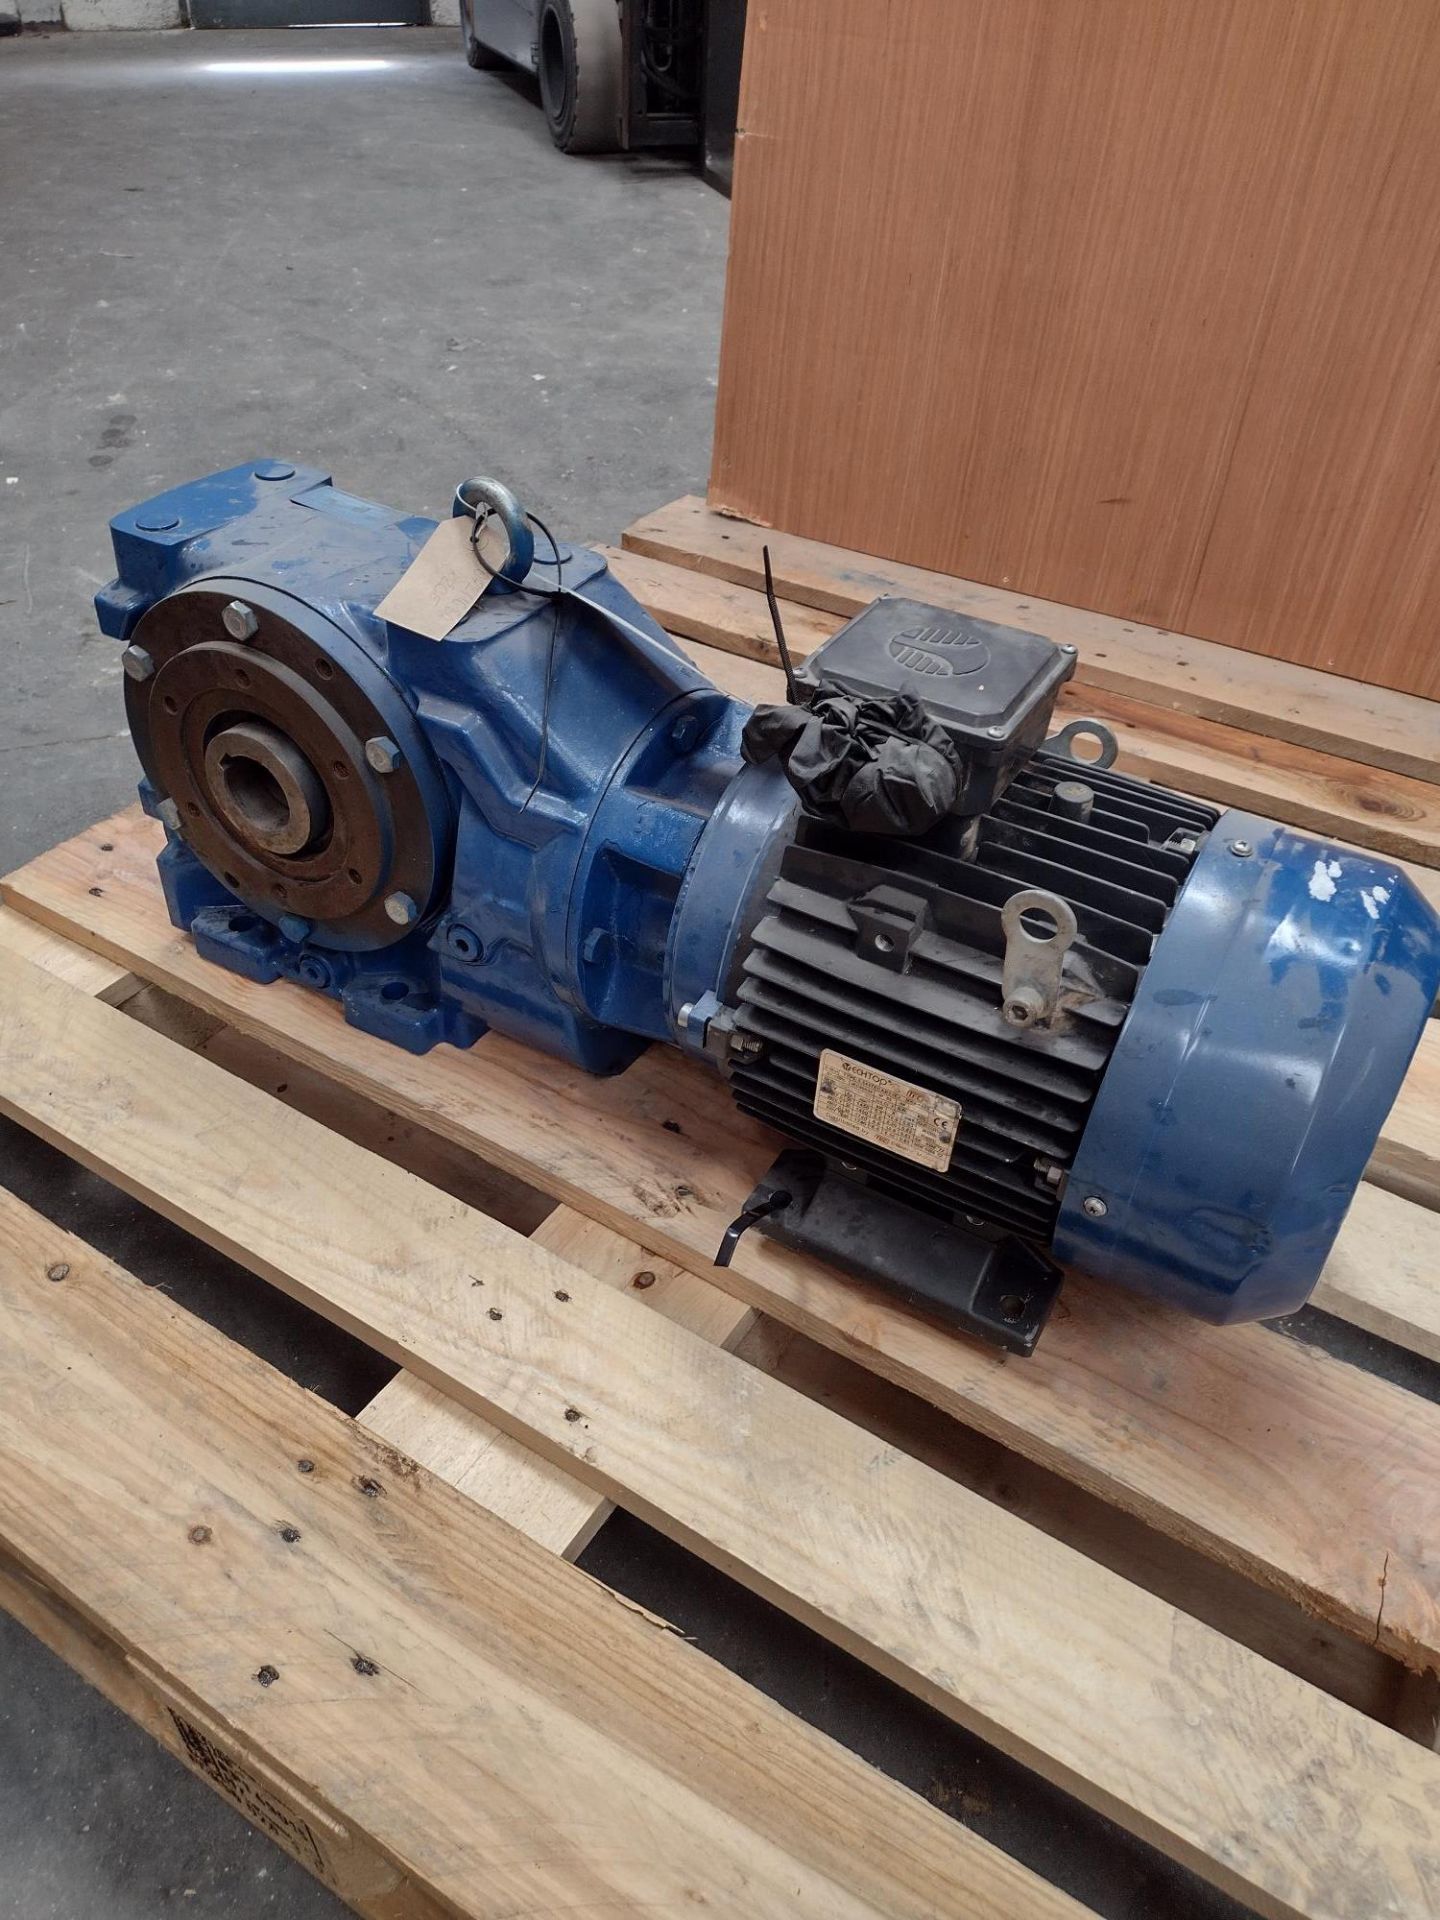 TEC Echtop 6.6kW Electric Motor, serial no. 13061198287, with Radicon C072116 BGZD5 gearbox, 16:1 - Image 2 of 4